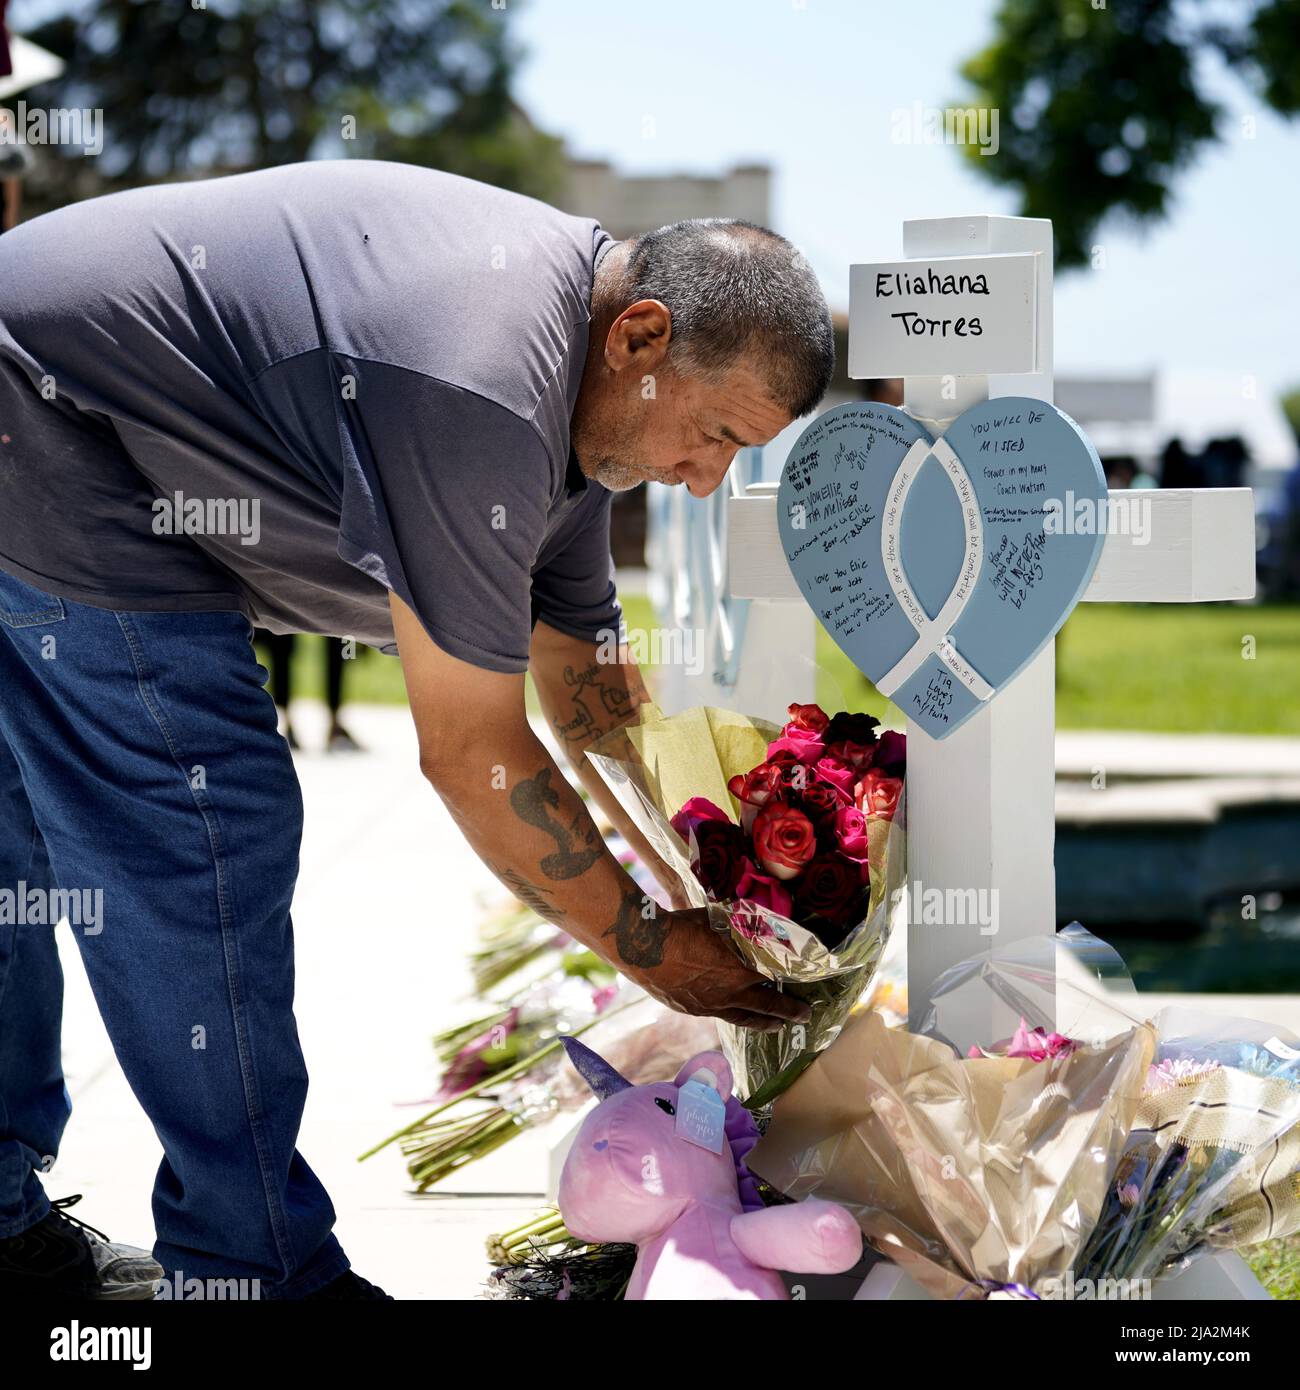 Uvalde, USA. 26th May, 2022. A man lays a bouquet to mourn for victims of a school mass shooting in Uvalde, Texas, the United States, May 26, 2022. At least 19 children and two adults were killed in a shooting at Robb Elementary School in the town of Uvalde, Texas, on Tuesday. Credit: Wu Xiaoling/Xinhua/Alamy Live News Stock Photo